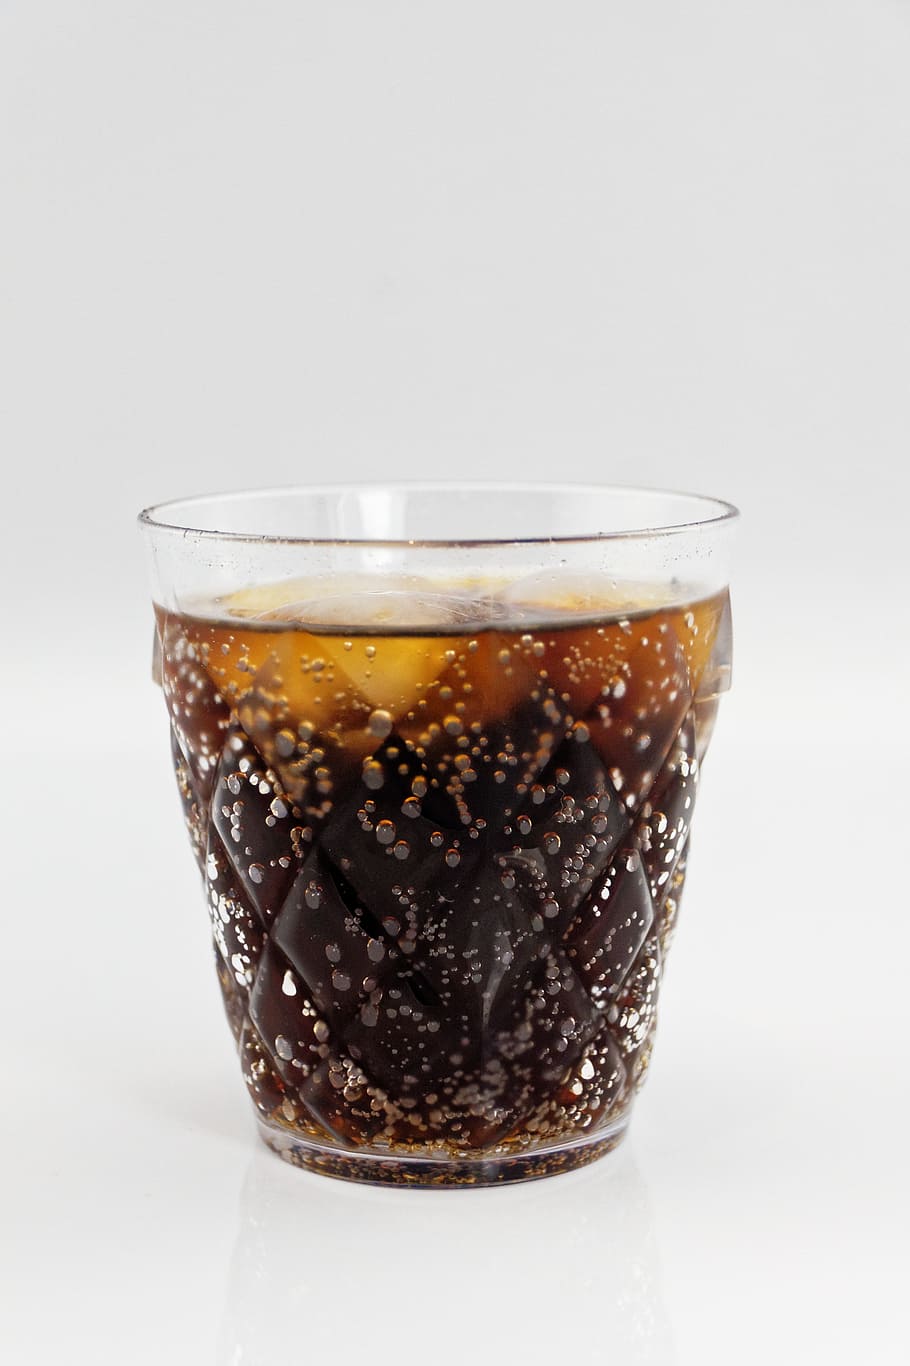 cola, inside, clear, drinking glass, drink, erfrischungsgetränk, refreshment, sparkling, ice, ice cubes